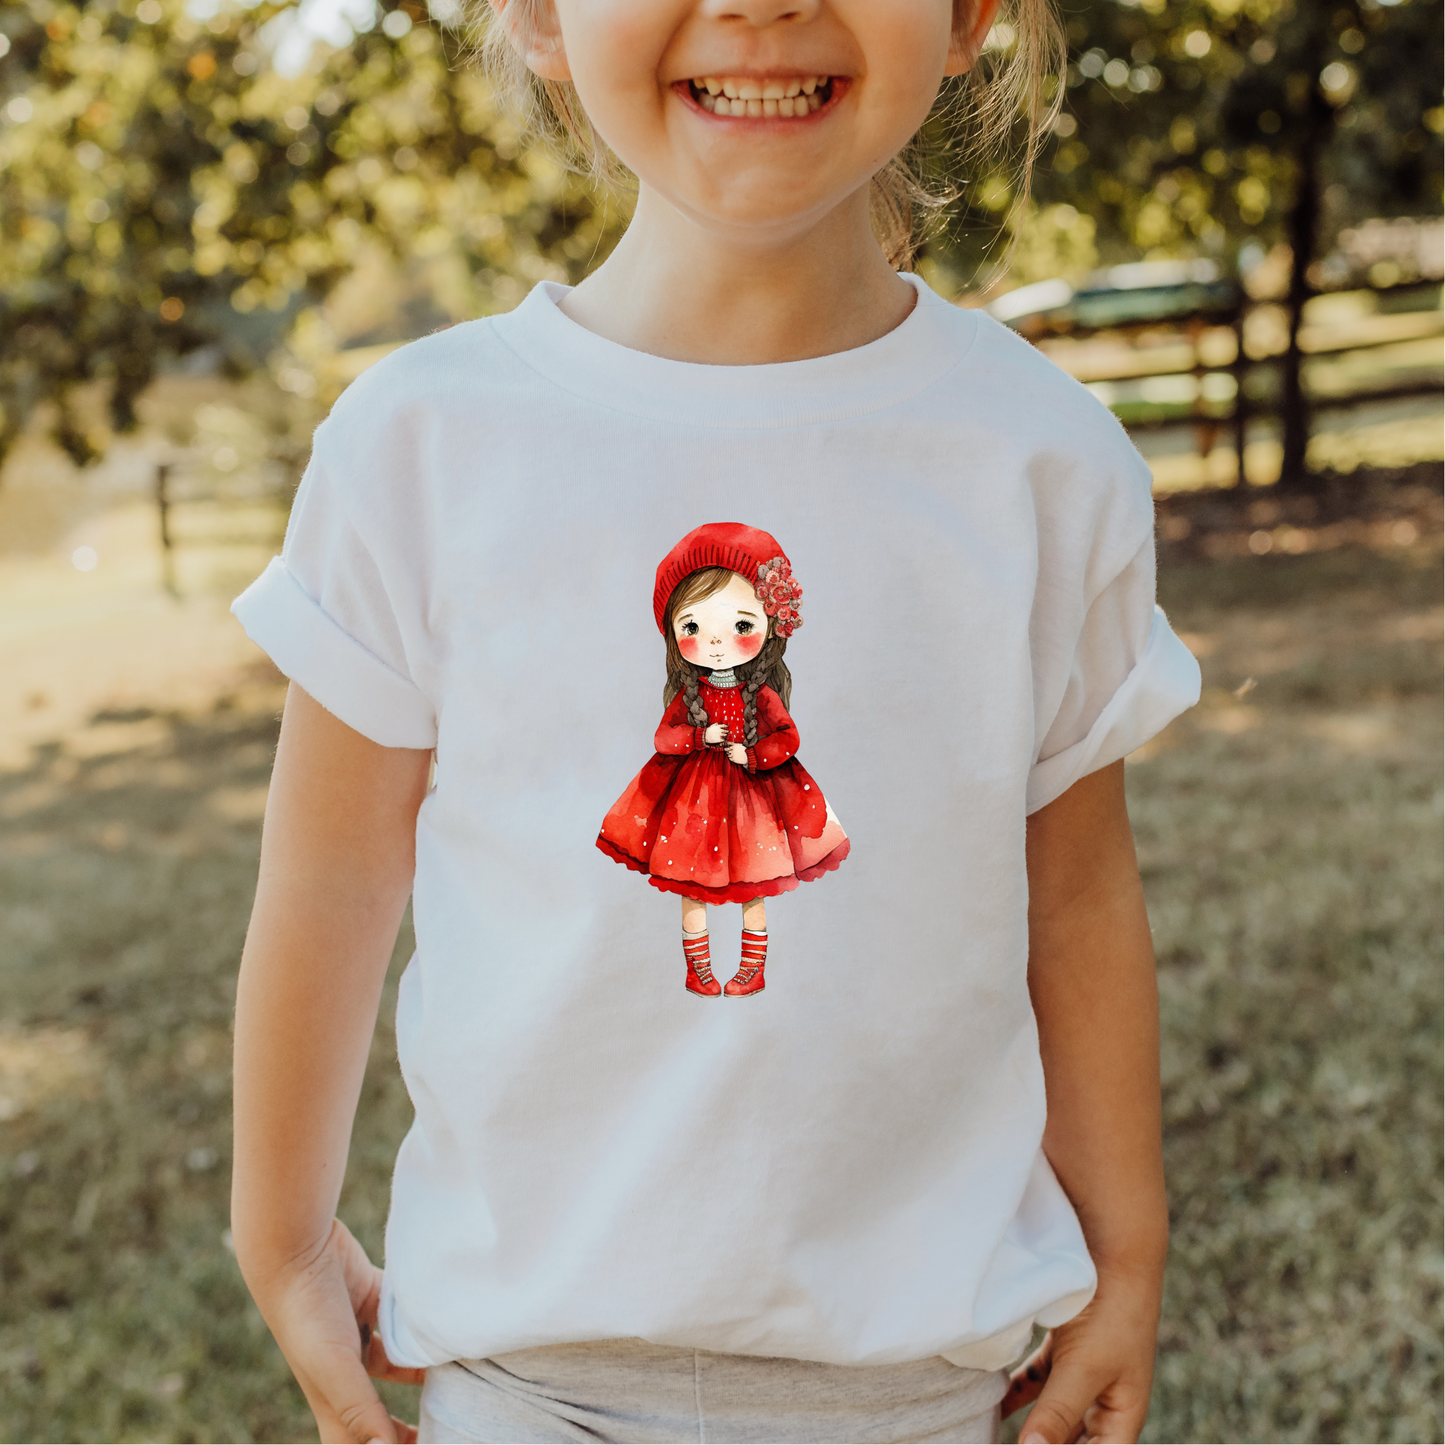 Red Girl Unisex Kids Youth Crew T-Shirt